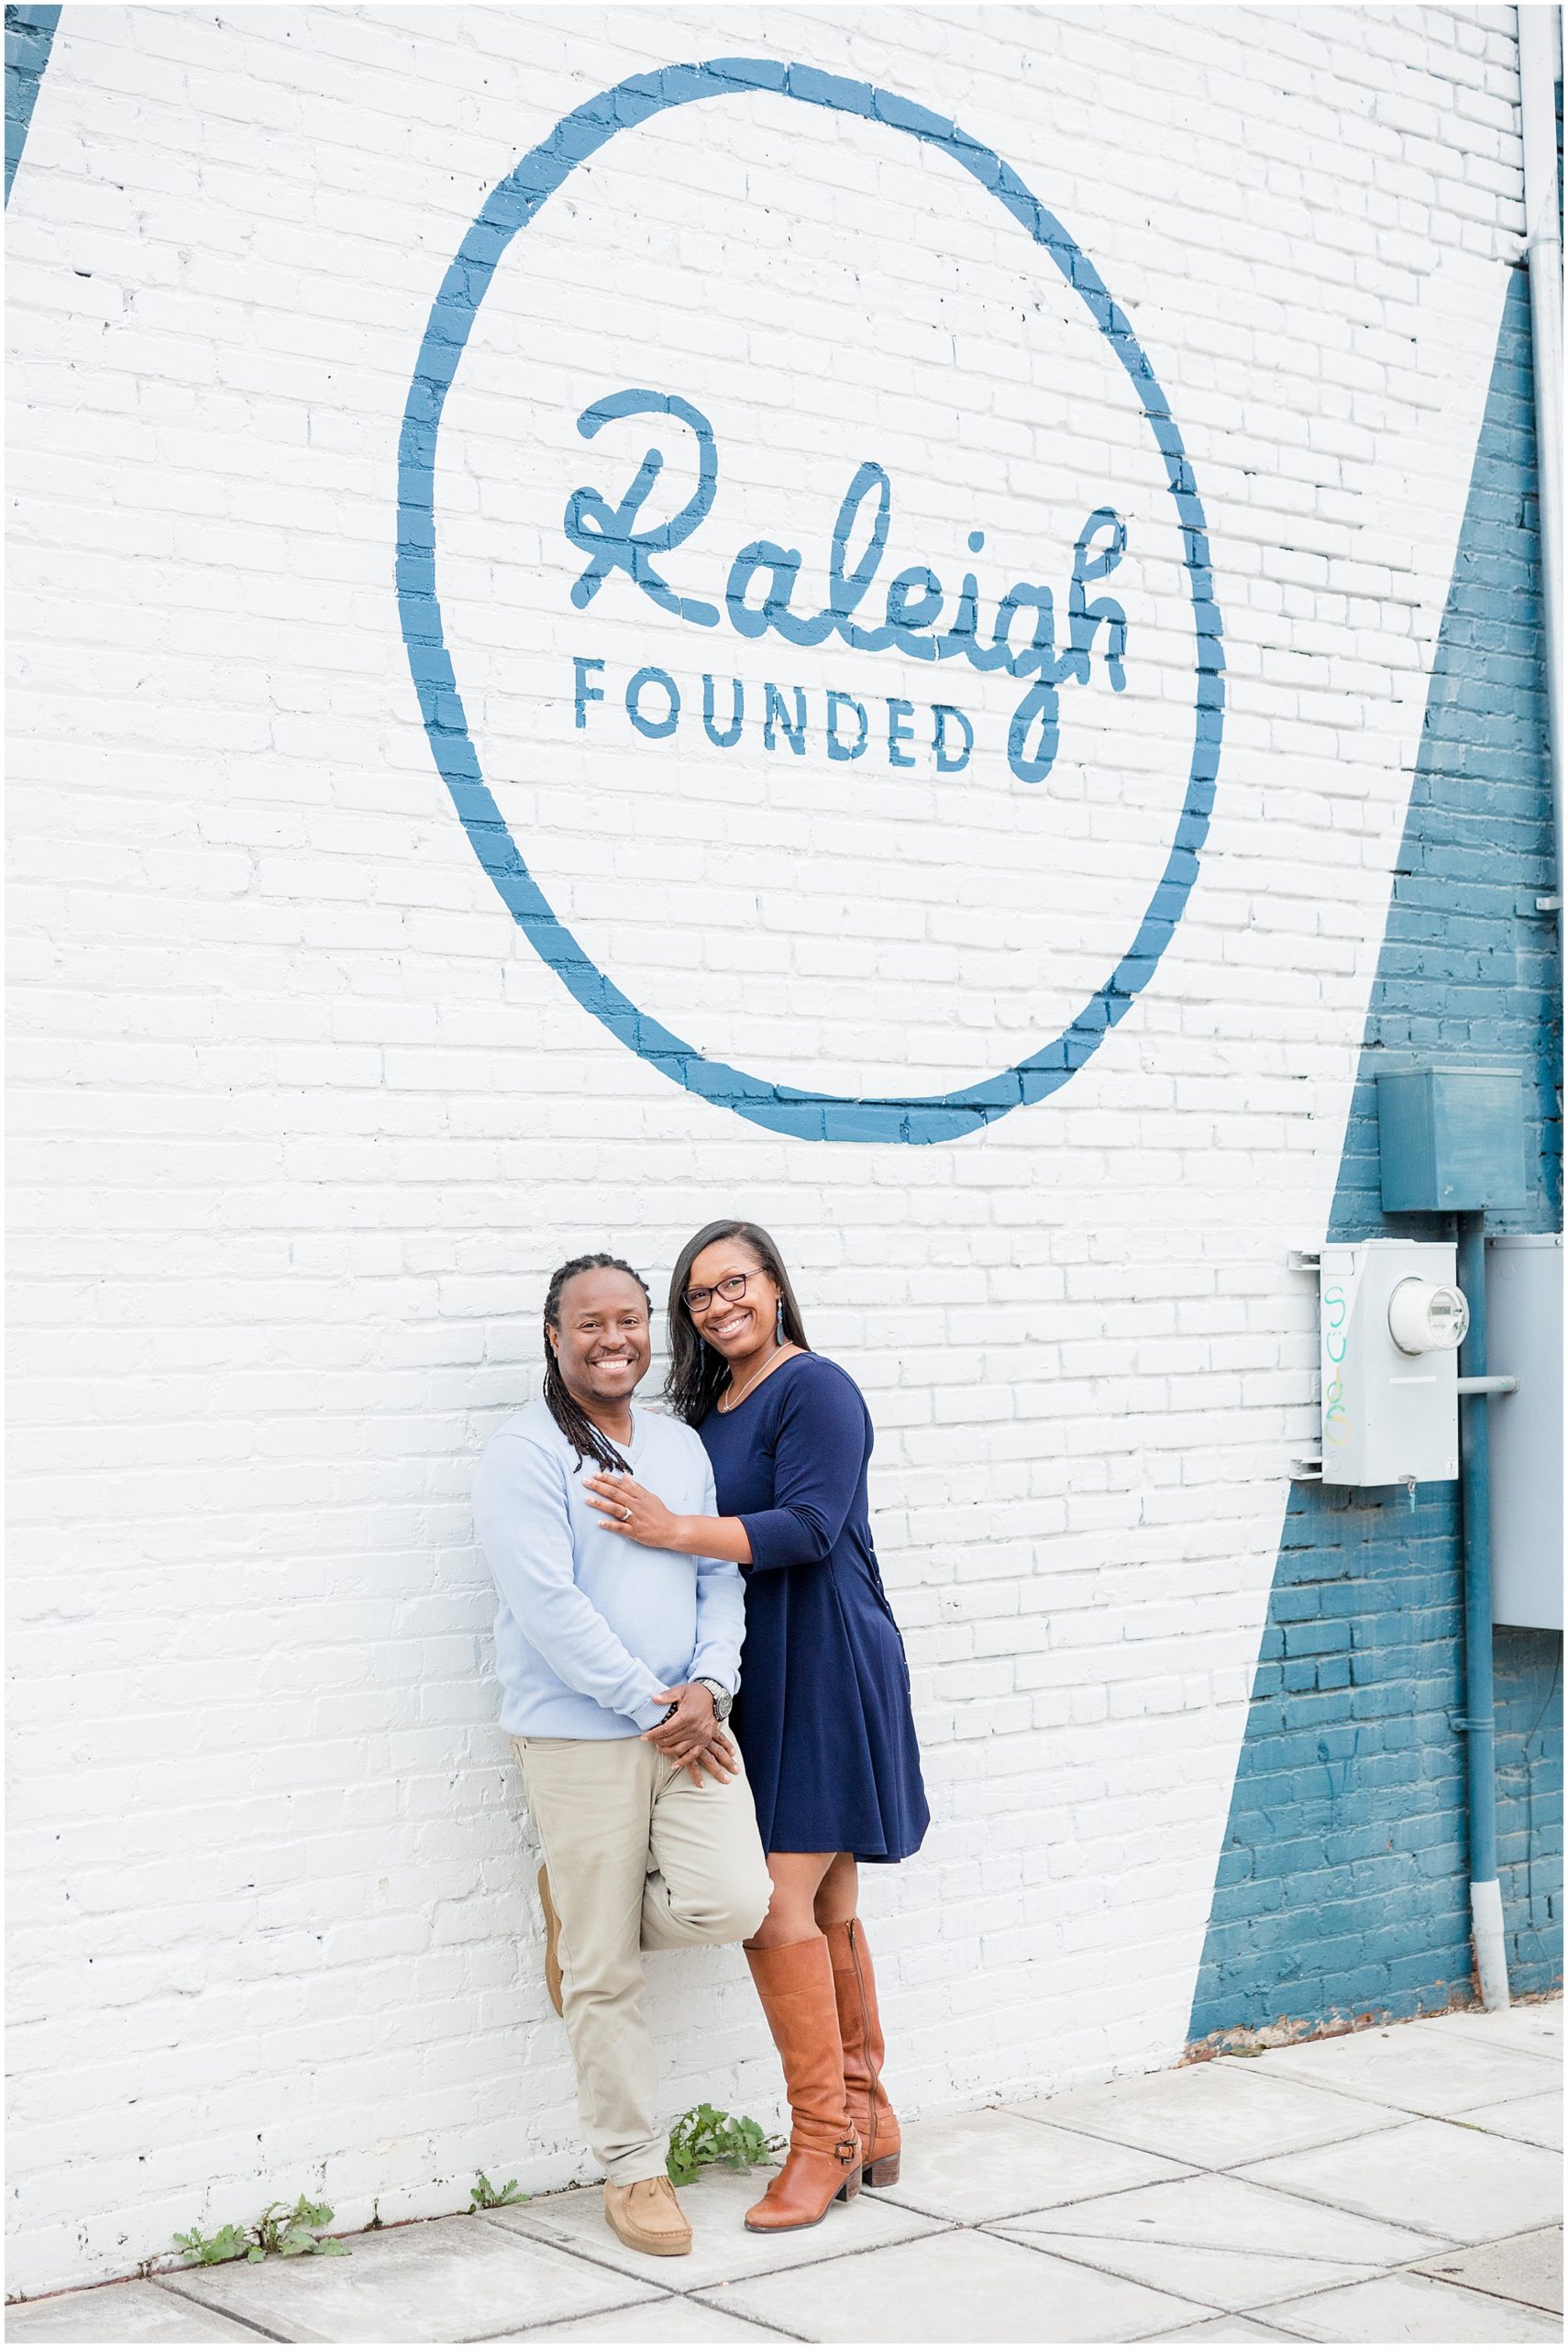 Black engagement photographer and DJ in Raleigh NC